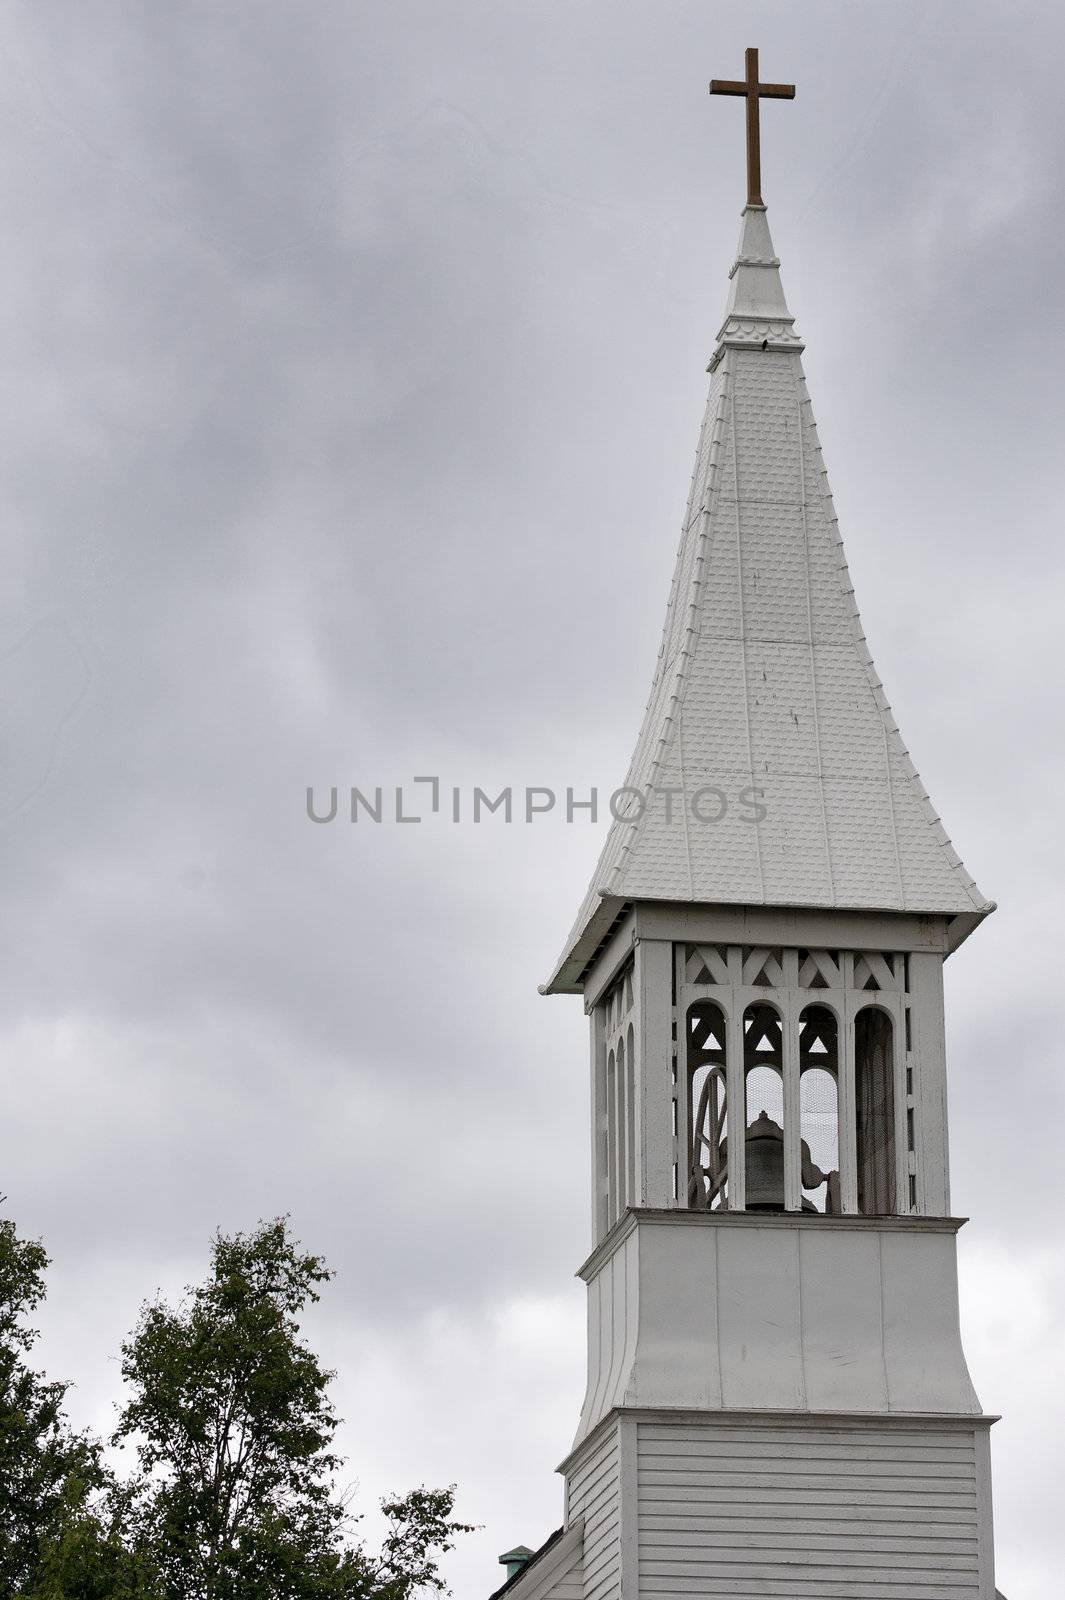 White tower with cross and bell against grey skies.